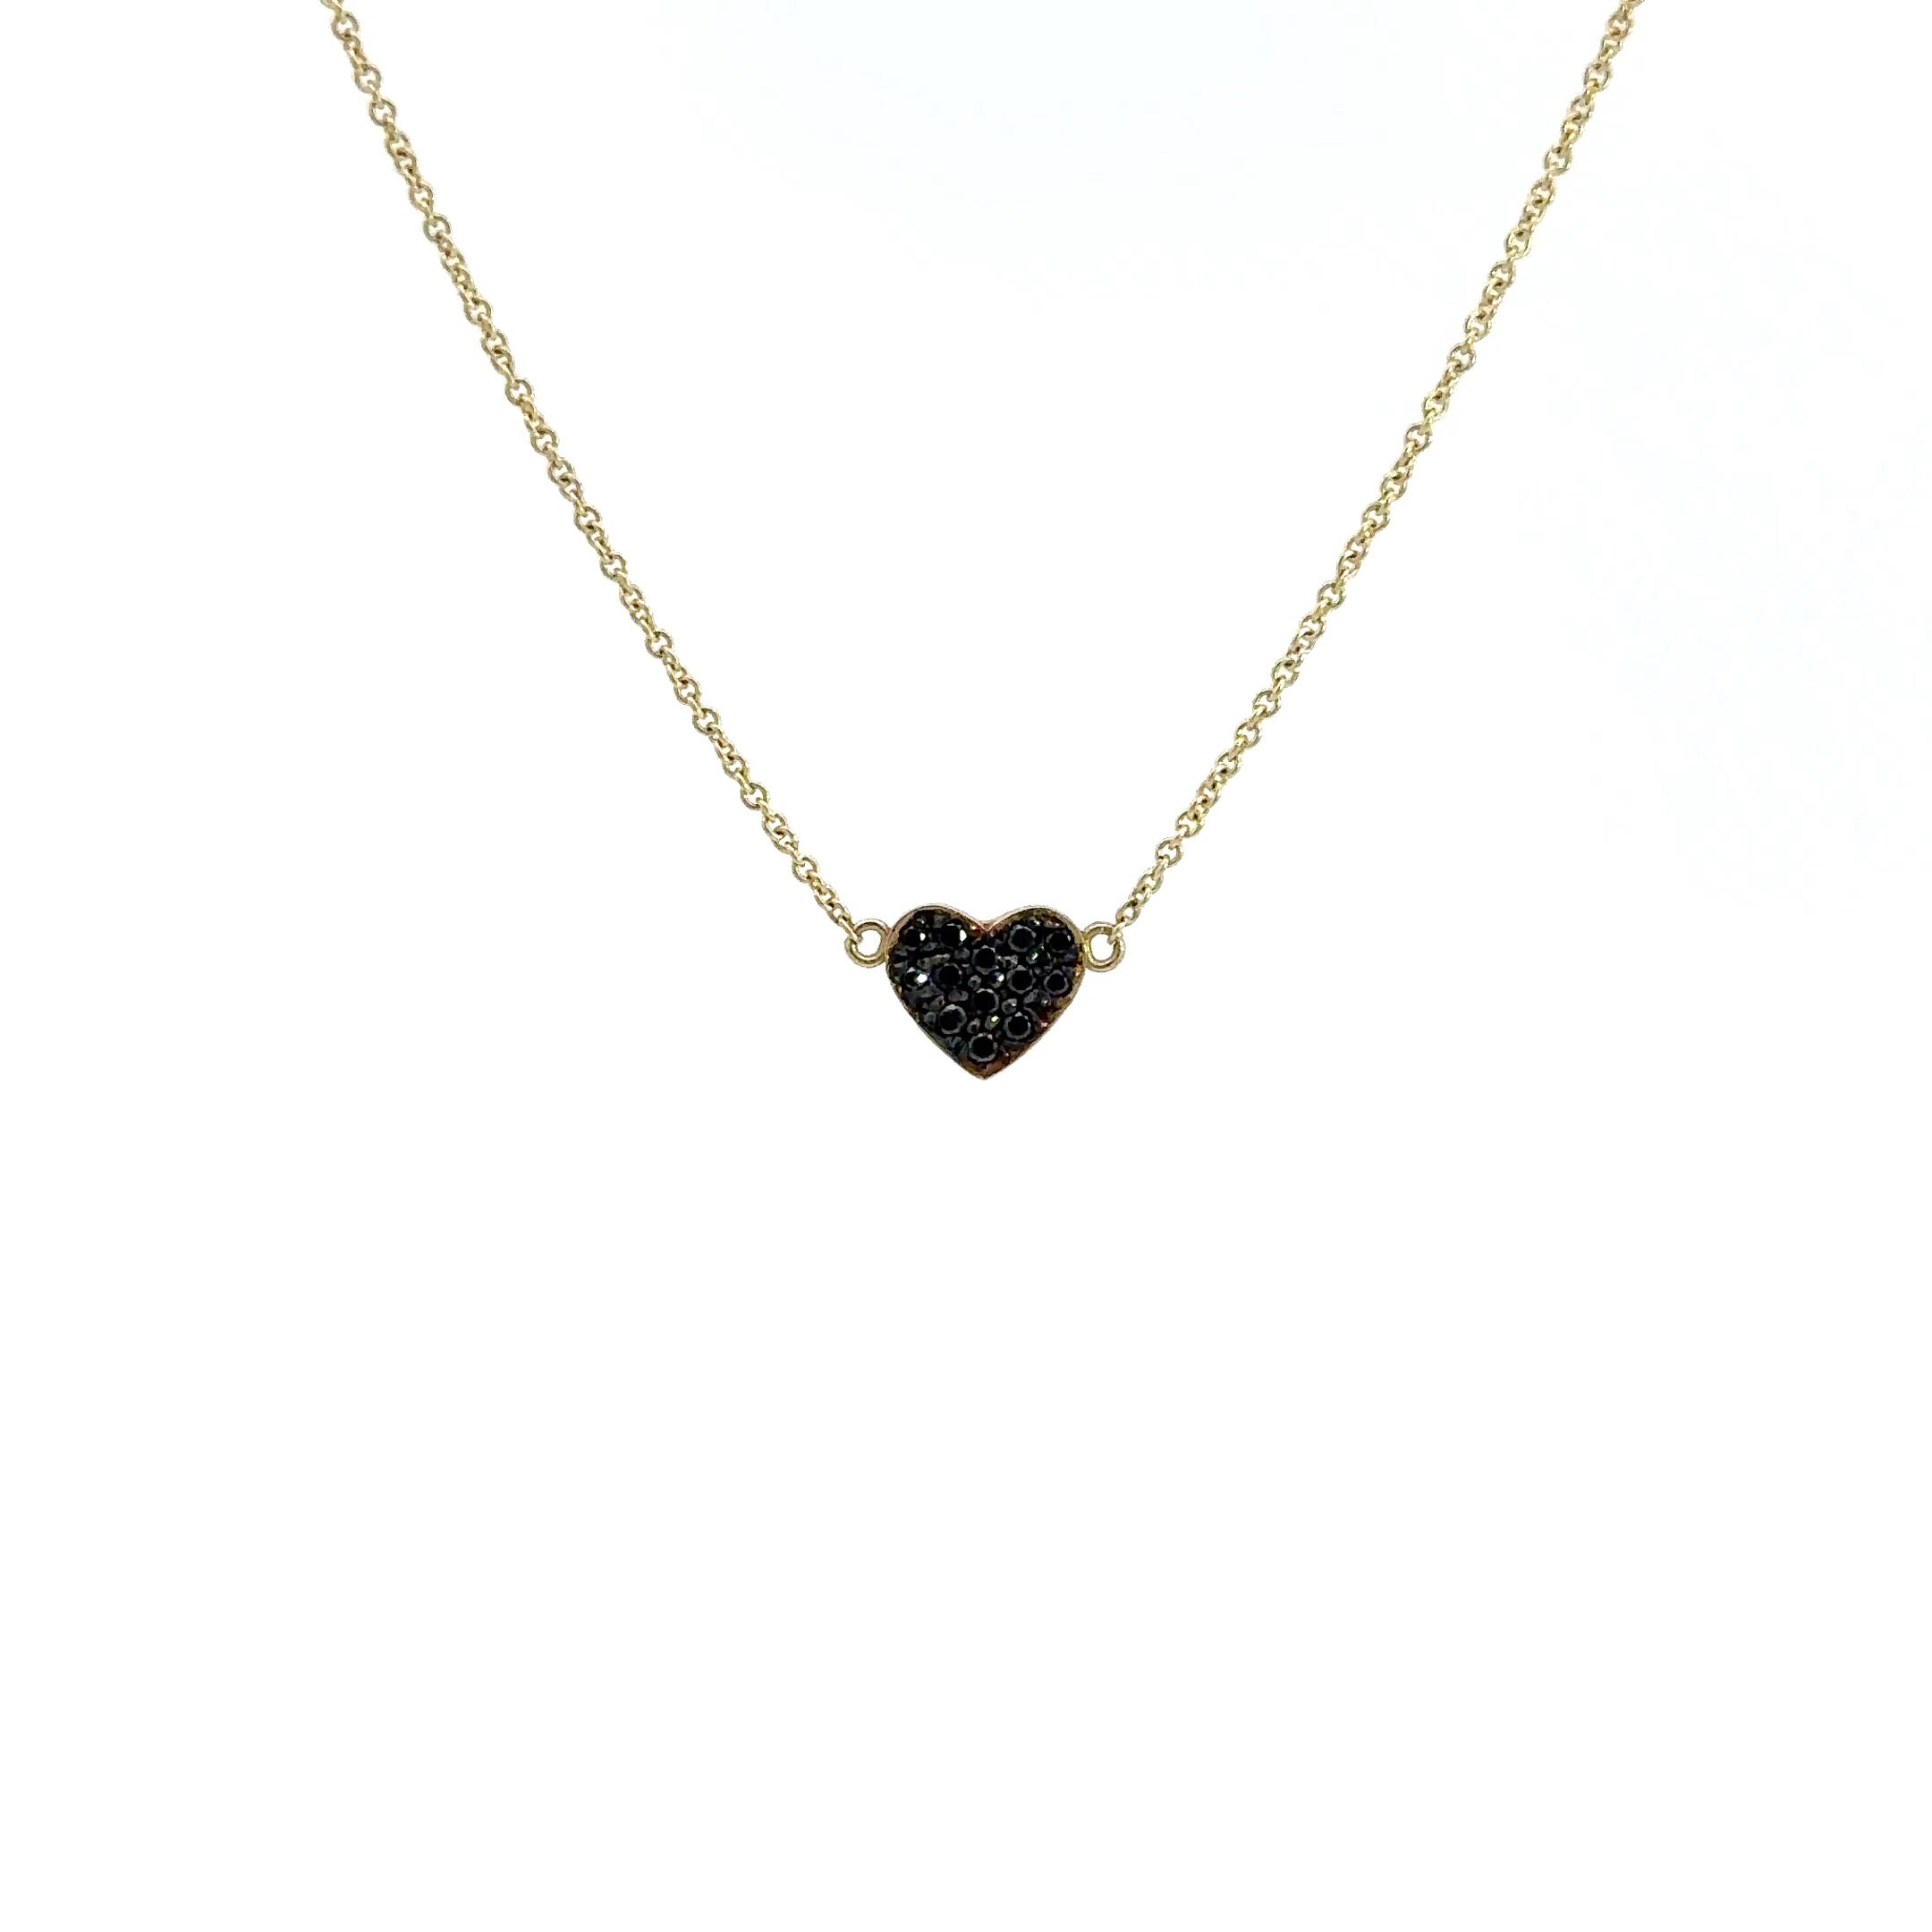 WD1230 14kt Yellow Gold Black Pave Diamond Heart Necklace